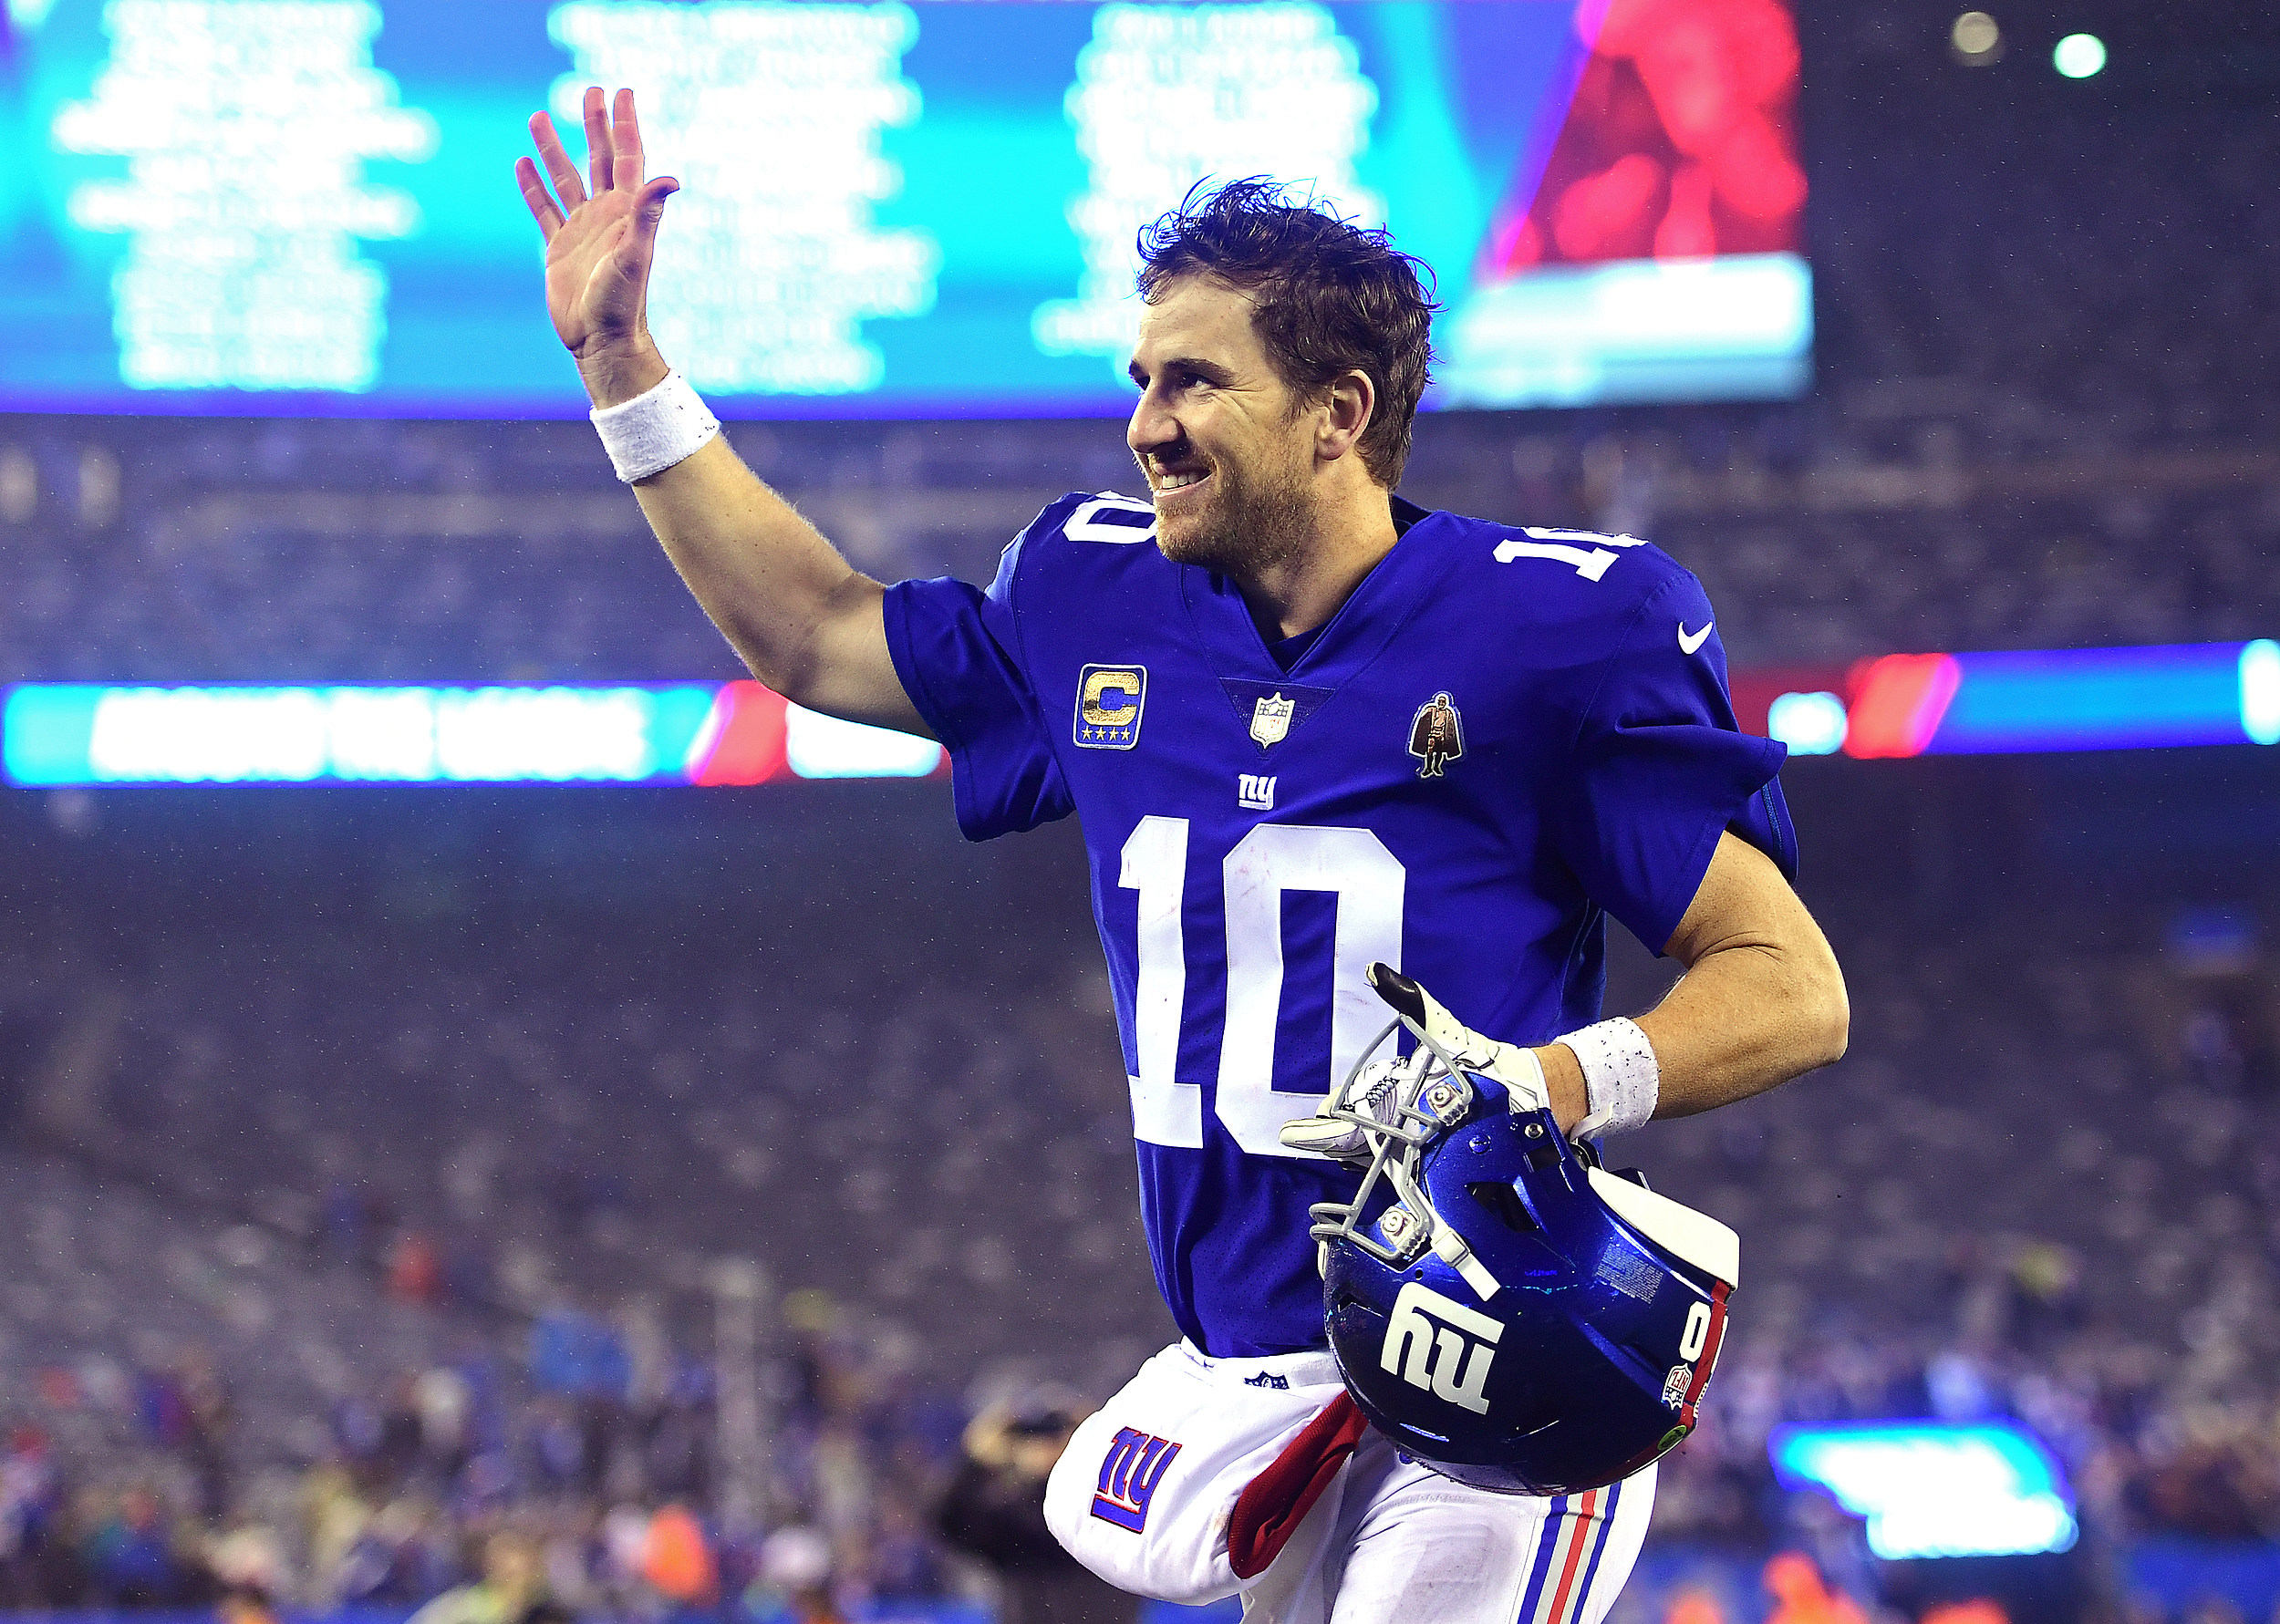 The Most Clutch Postseason Quarterback Of All Time Is Eli Manning